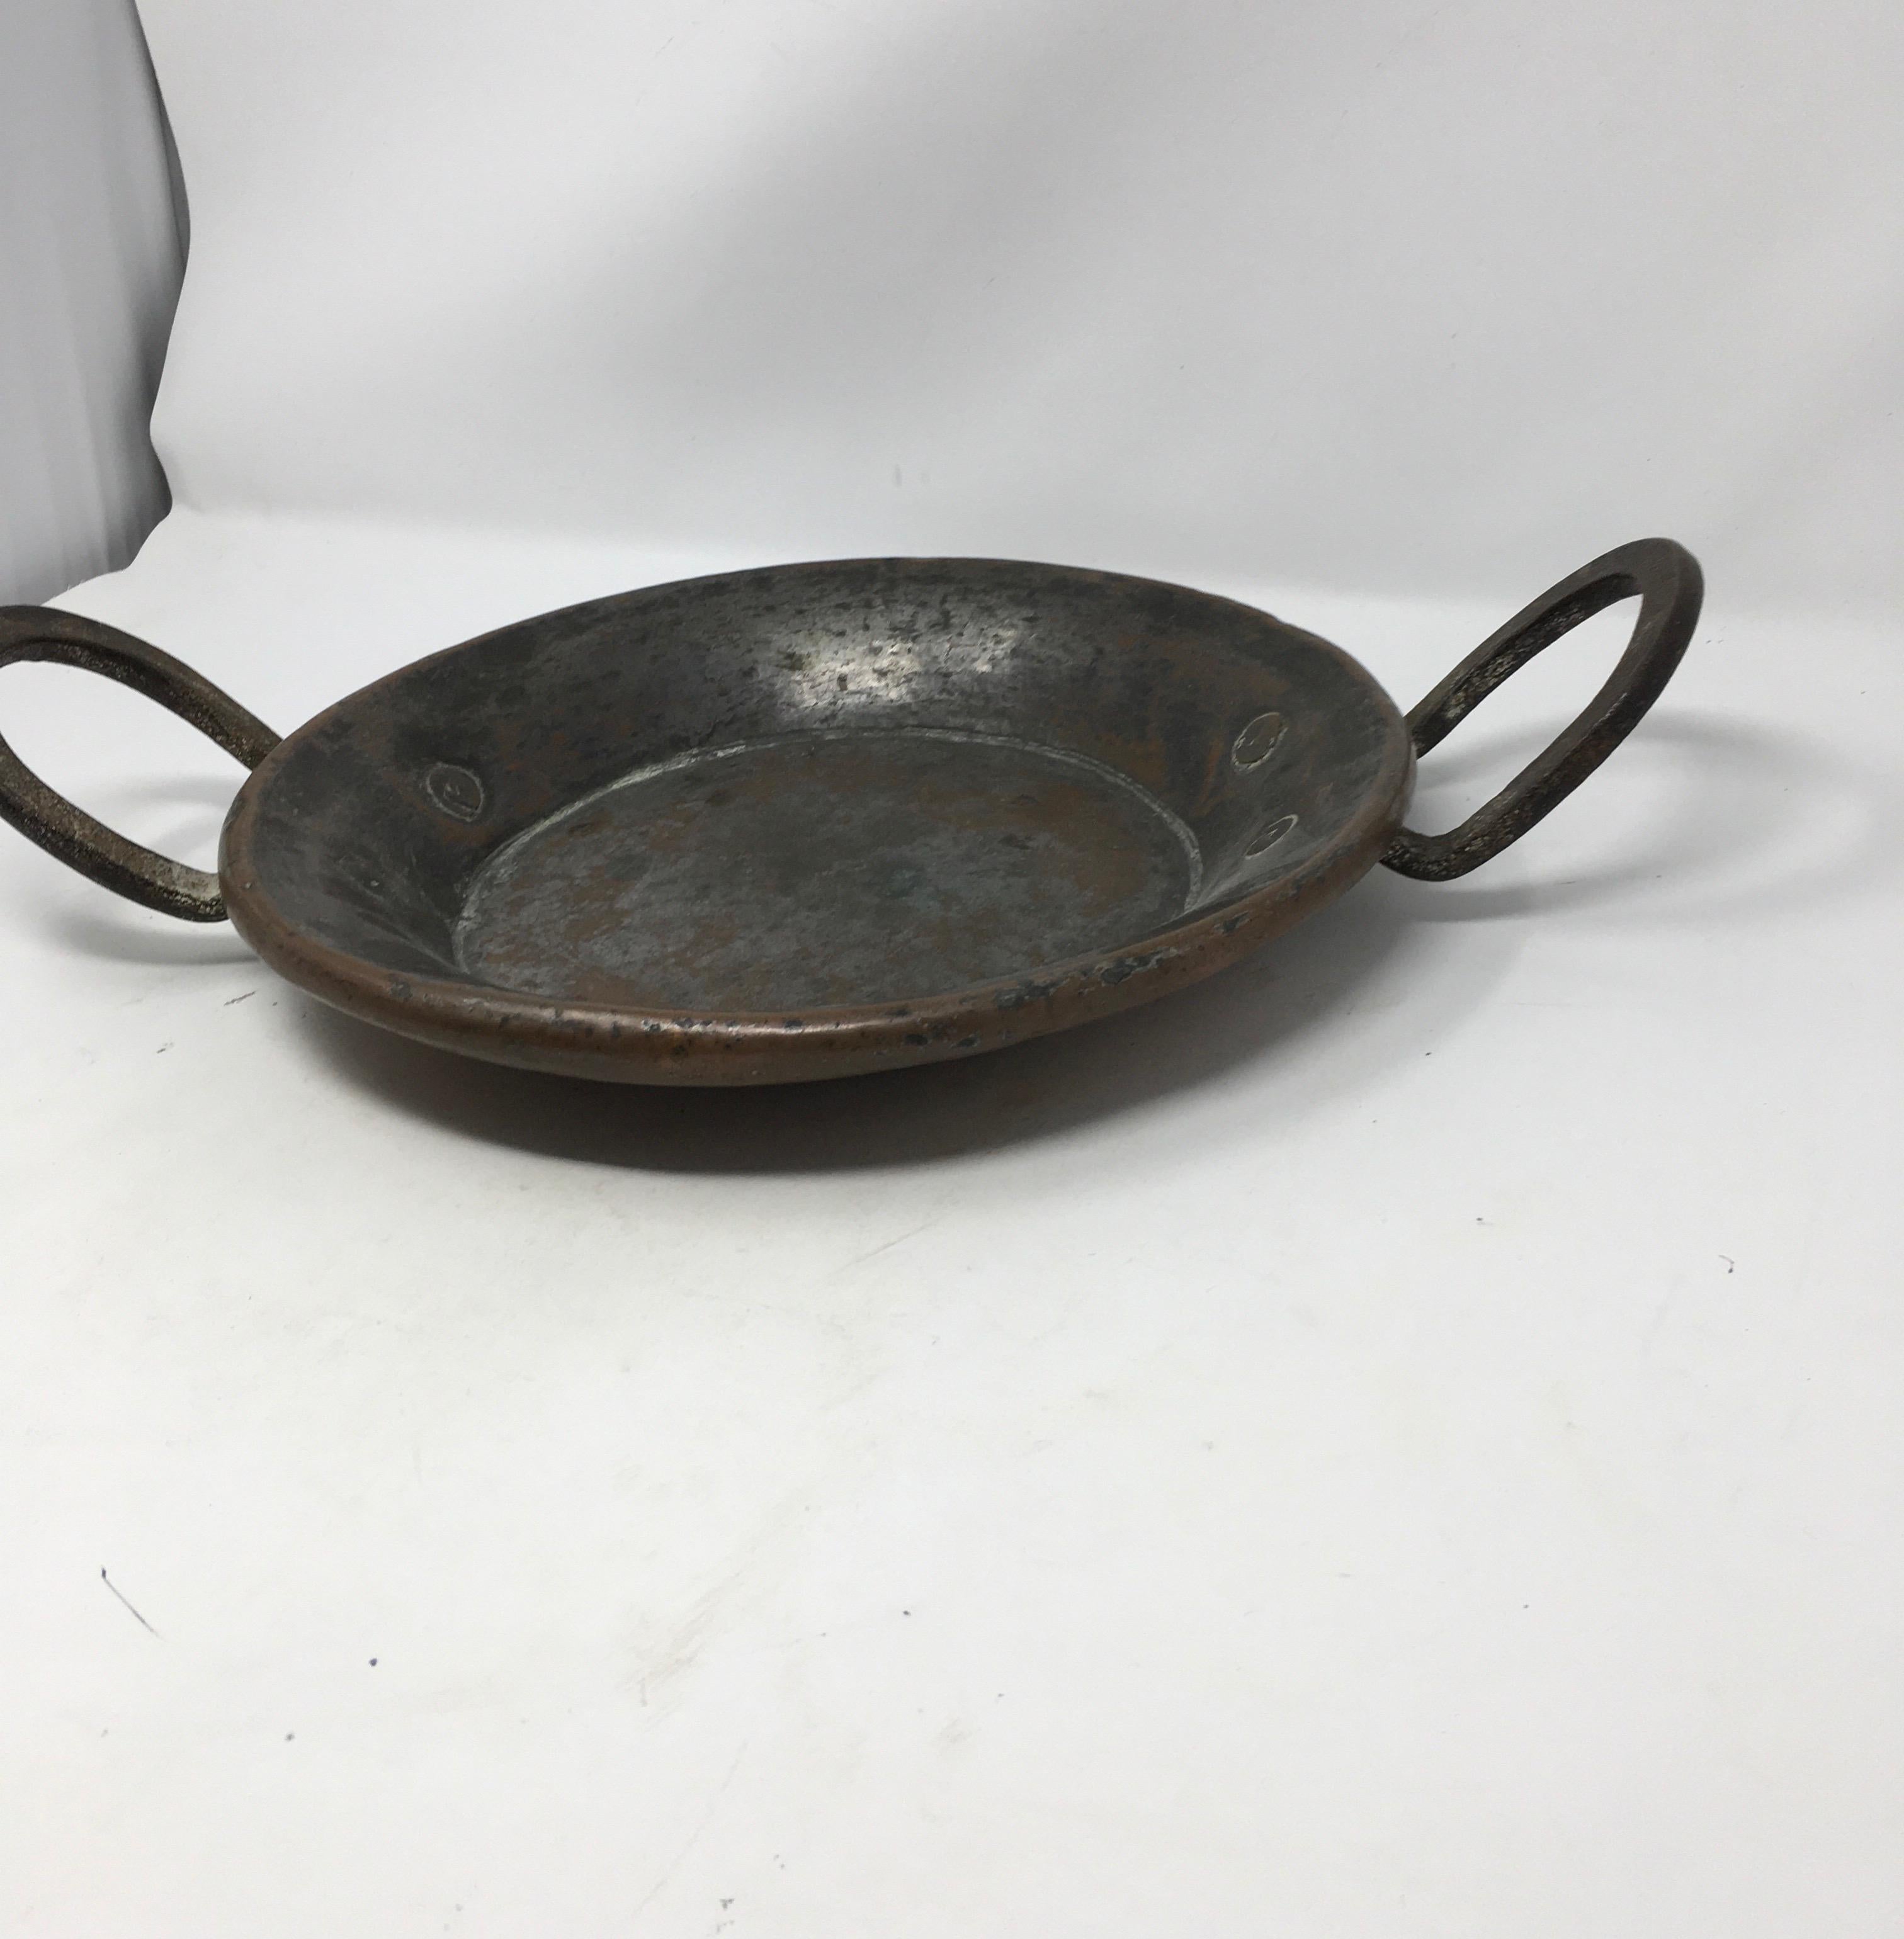 This is an old French copper pot featuring an iron handles and copper rivets. The pot is tin lined but has lost some its tin over many years of use. Boasting a wonderful patina this piece would add provincial charm to your kitchen.
This piece